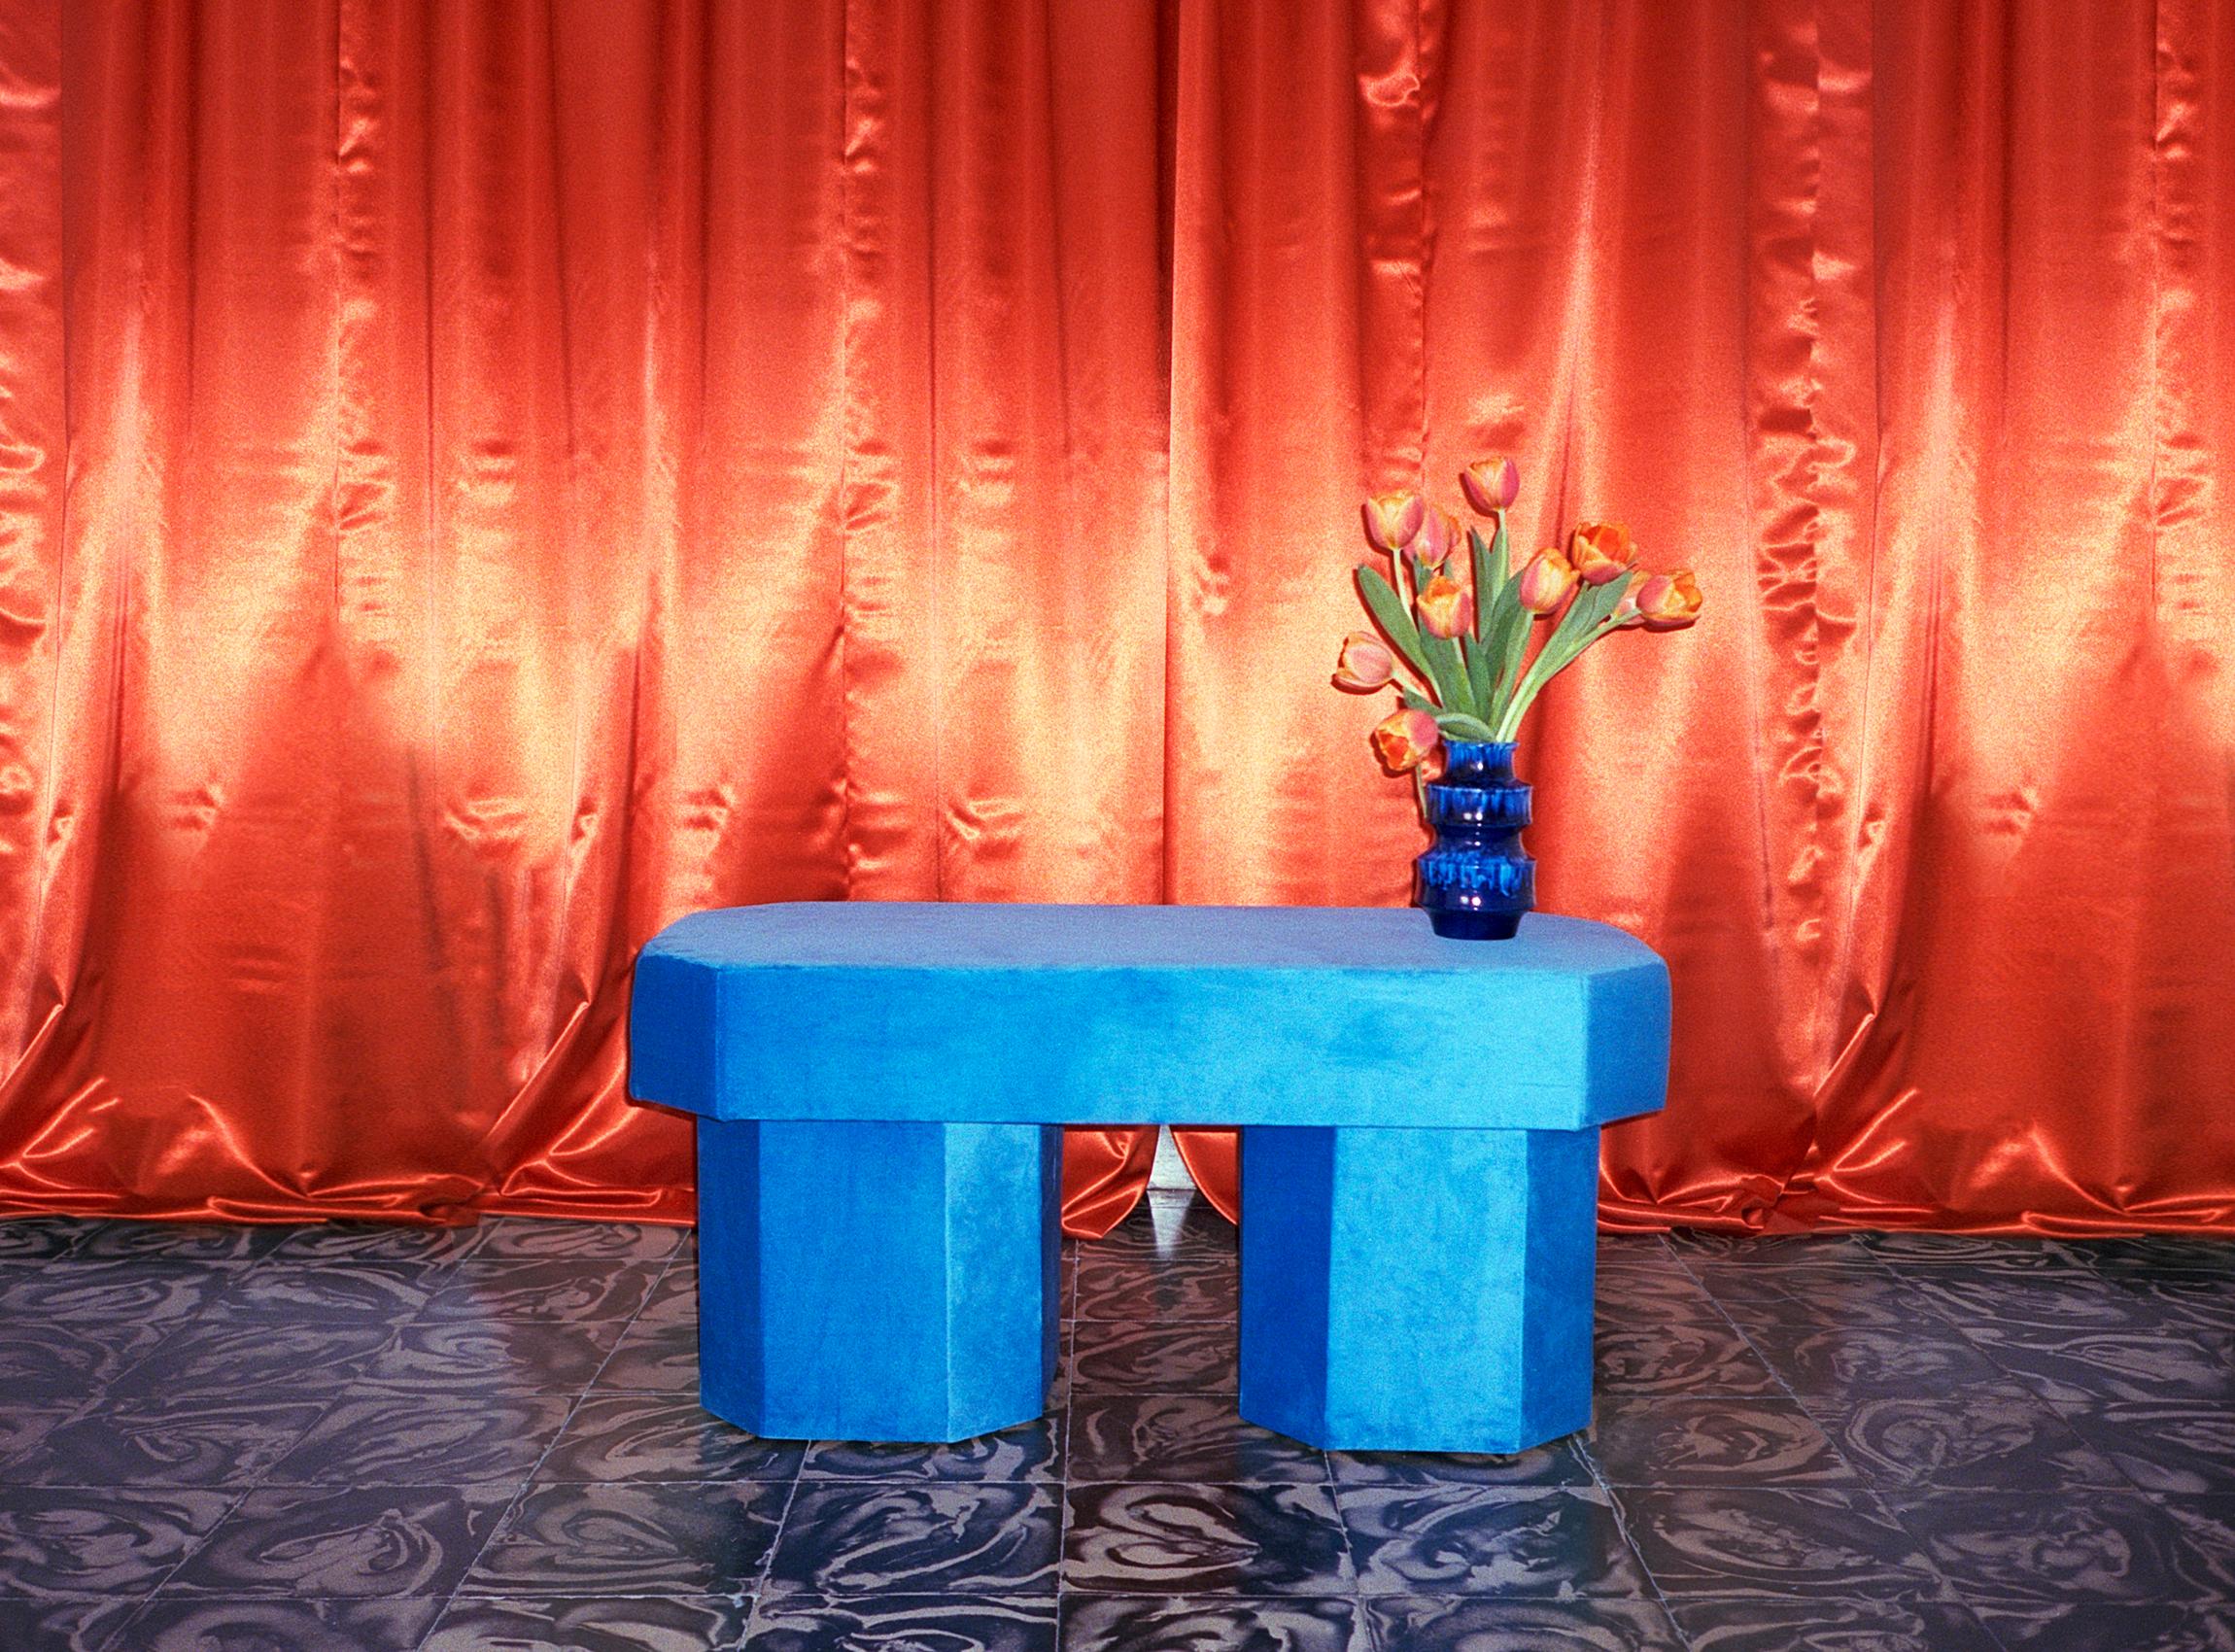 Viva Blue Bench by Houtique
Dimensions: D 100 x W 45 x H 48 cm
Materials: Velvet, Upholstery, Wood
Also available in different colours. Please contact us.

VIVA BENCH.
Designed by Carolina Mico. Made in Spain.
Upholstered bench in flame-retardant